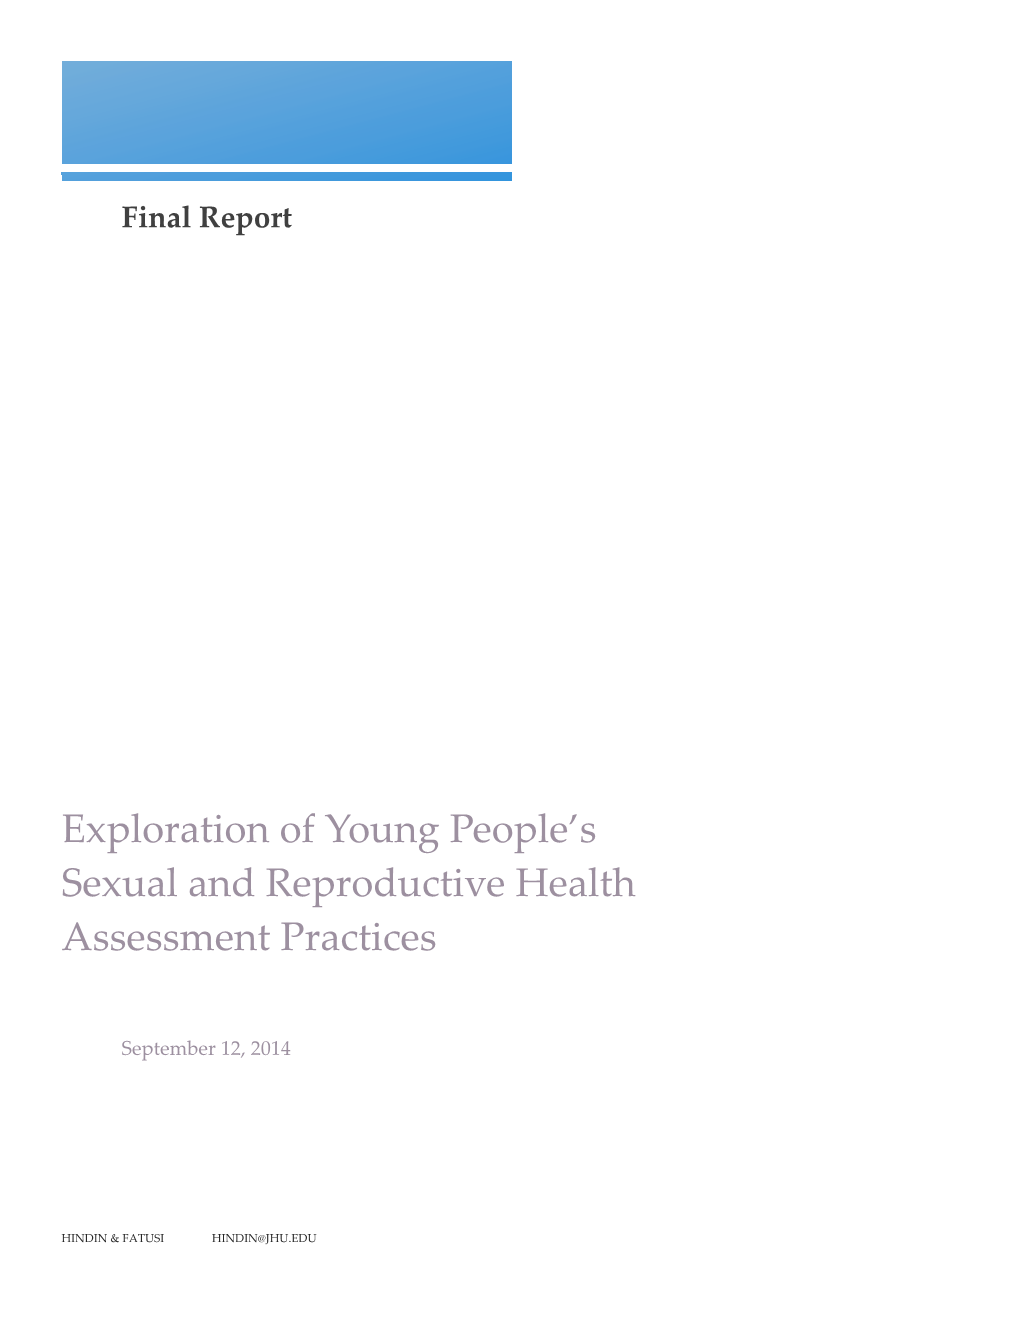 Exploration of Young People's Sexual and Reproductive Health